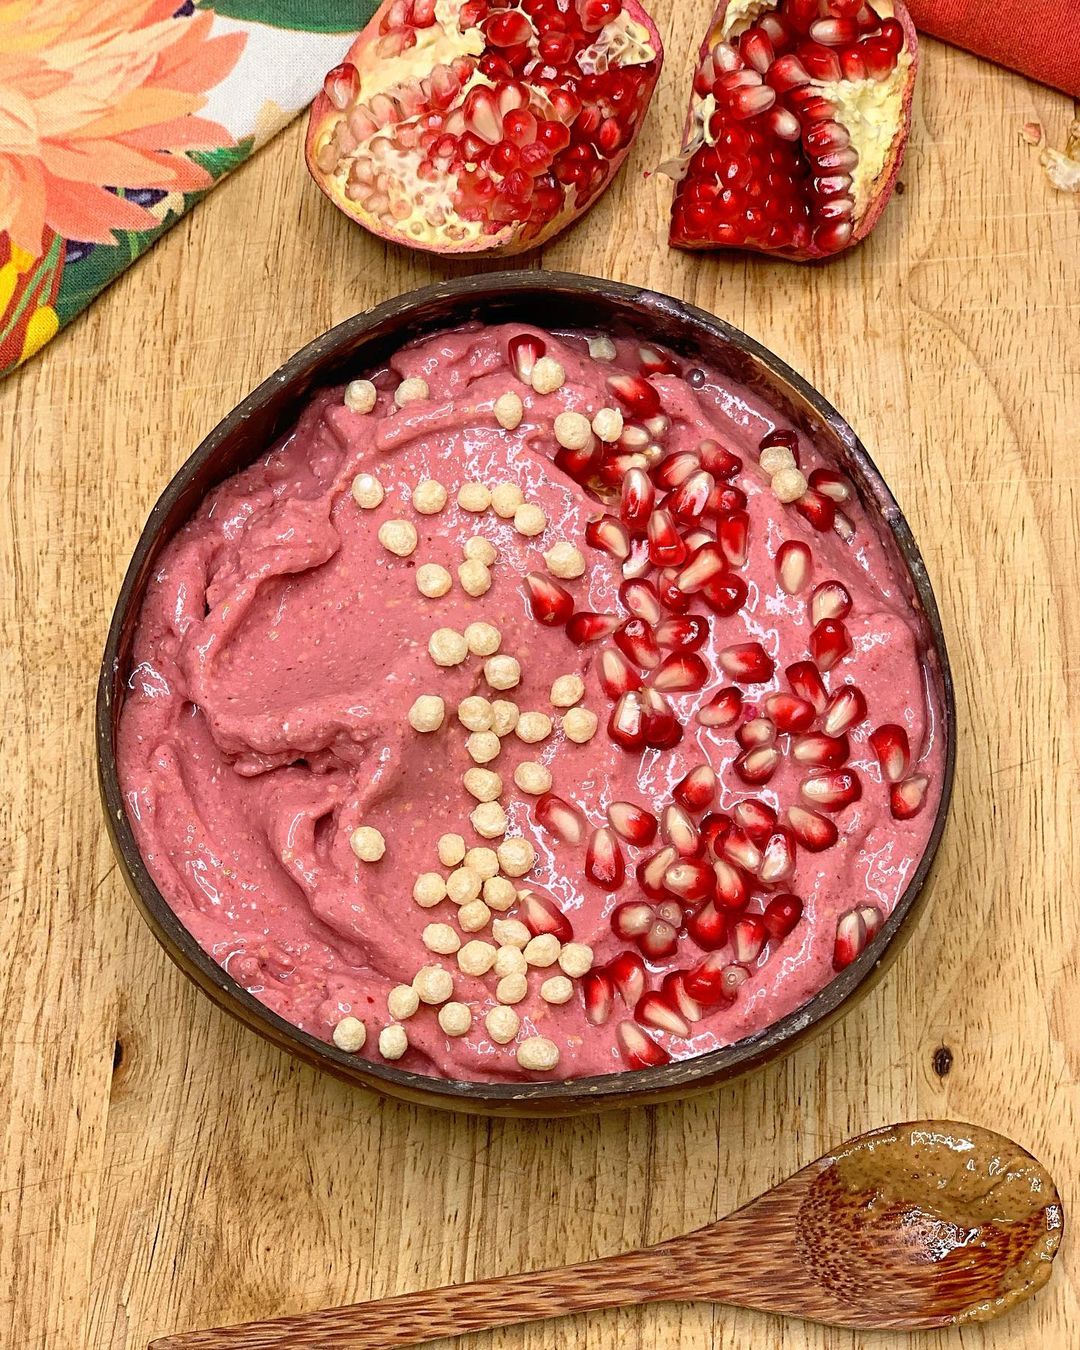 Oats & Pomegranate Smoothie Bowl